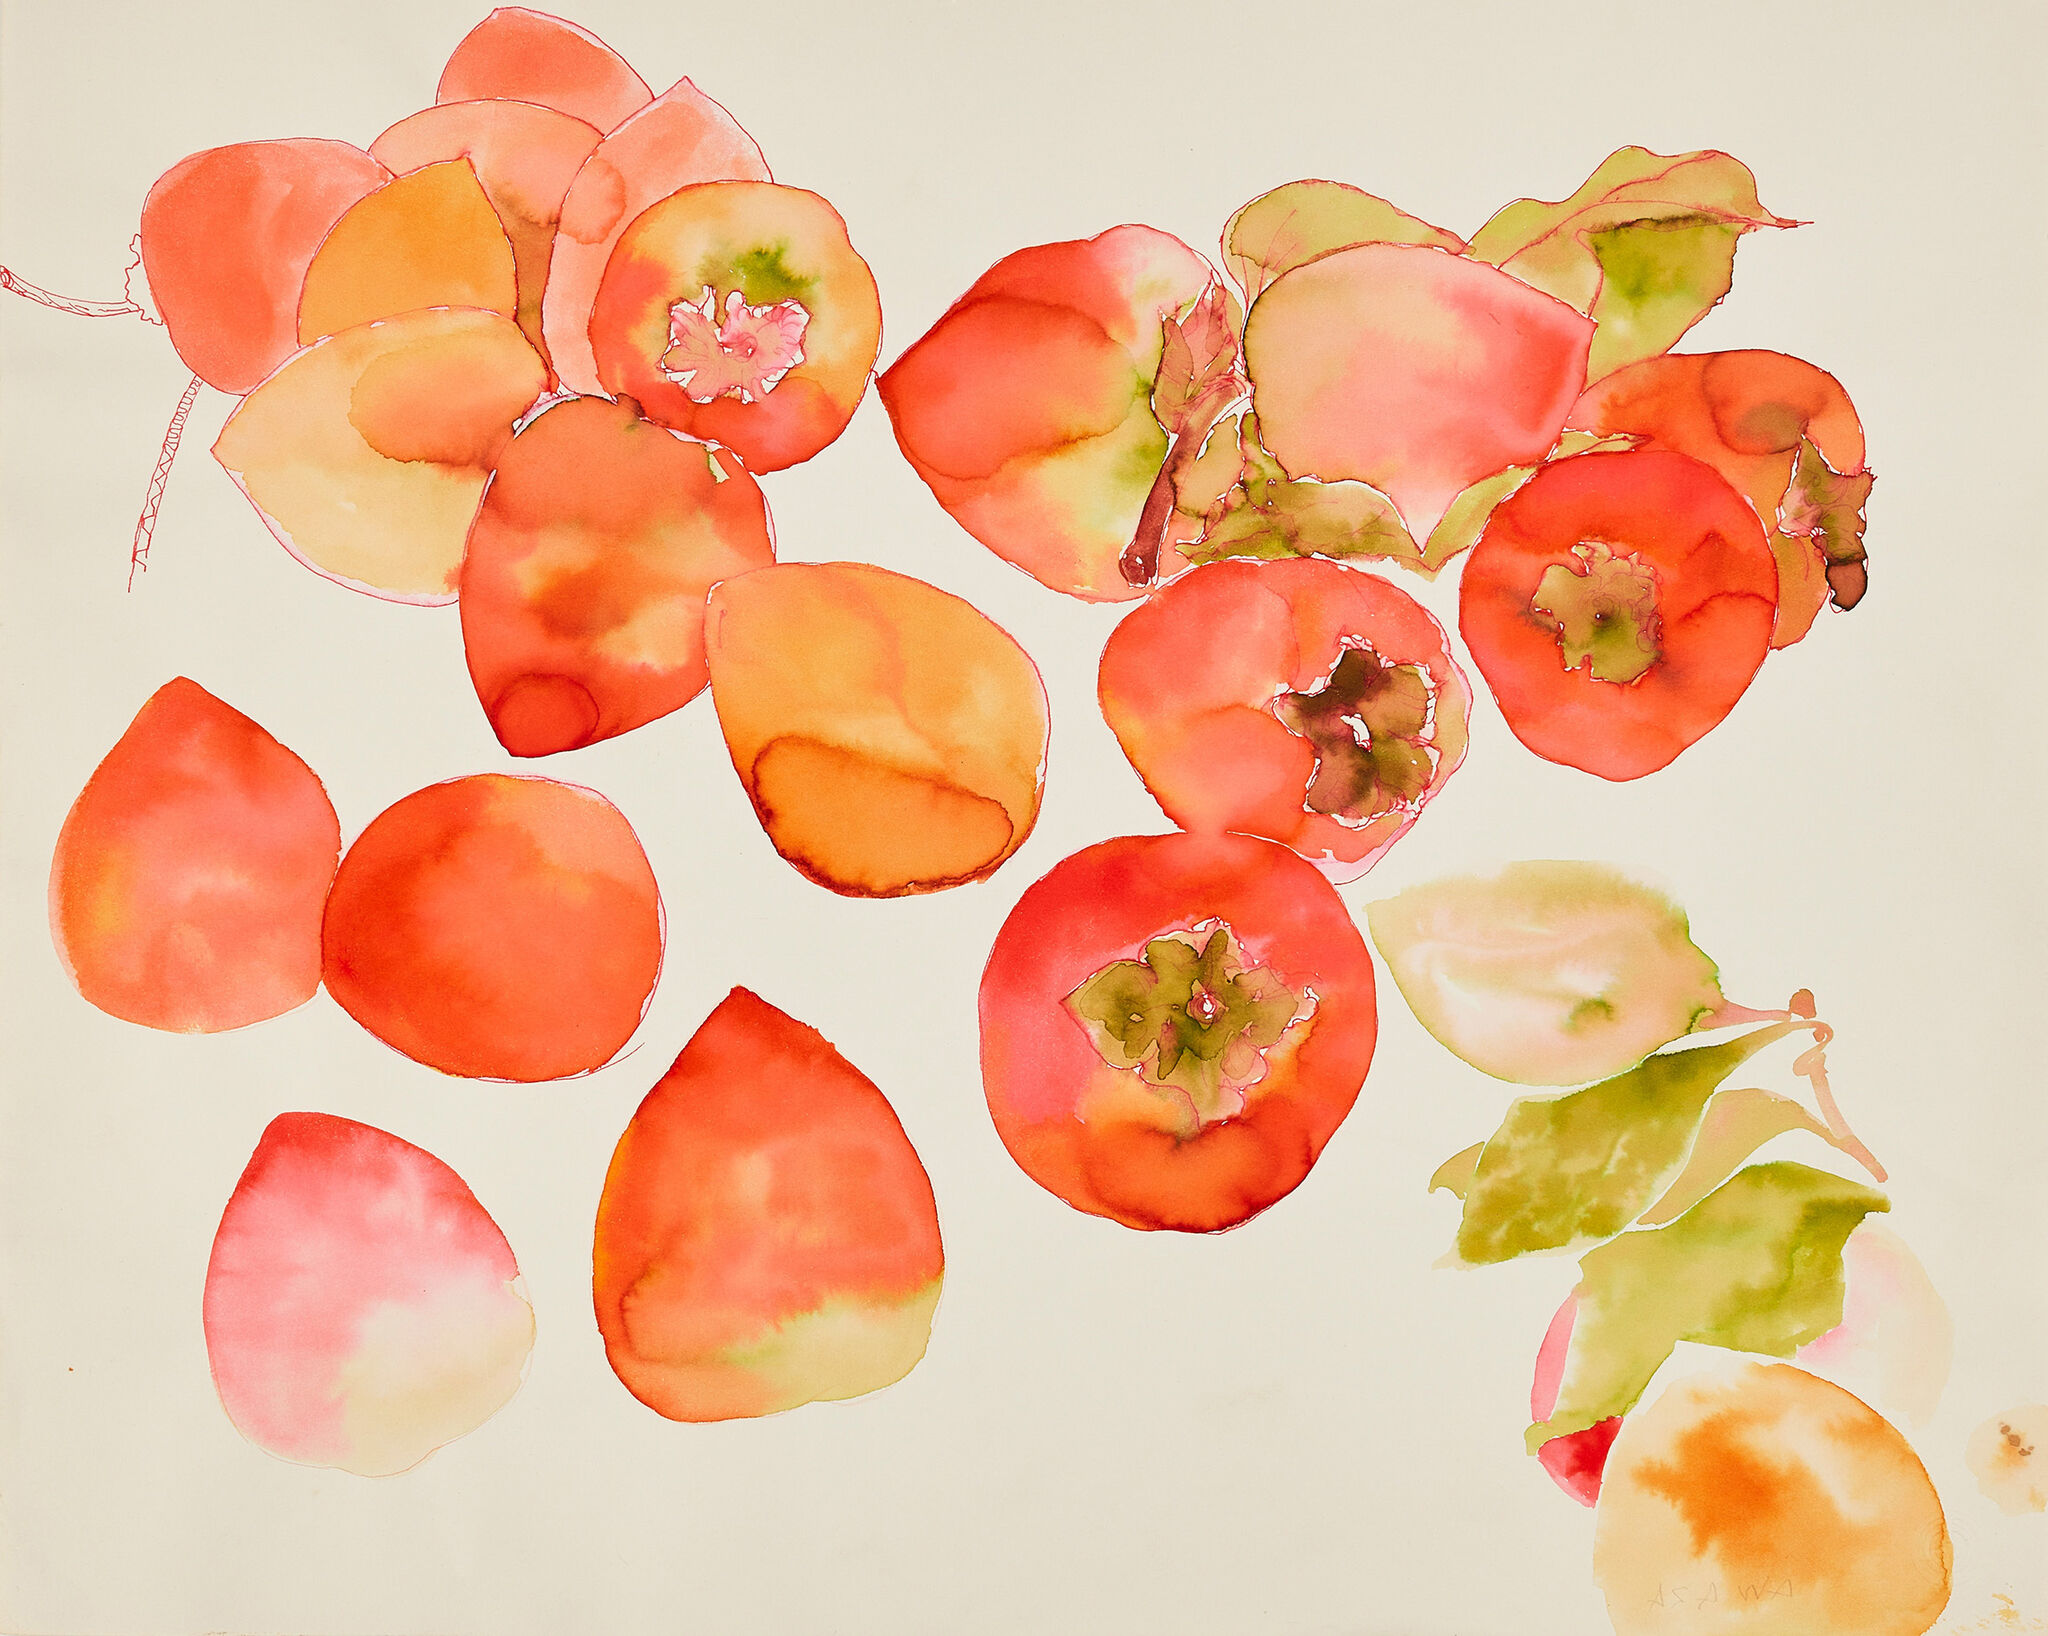 A watercolor painting of persimmons in red, orange, and pink hues